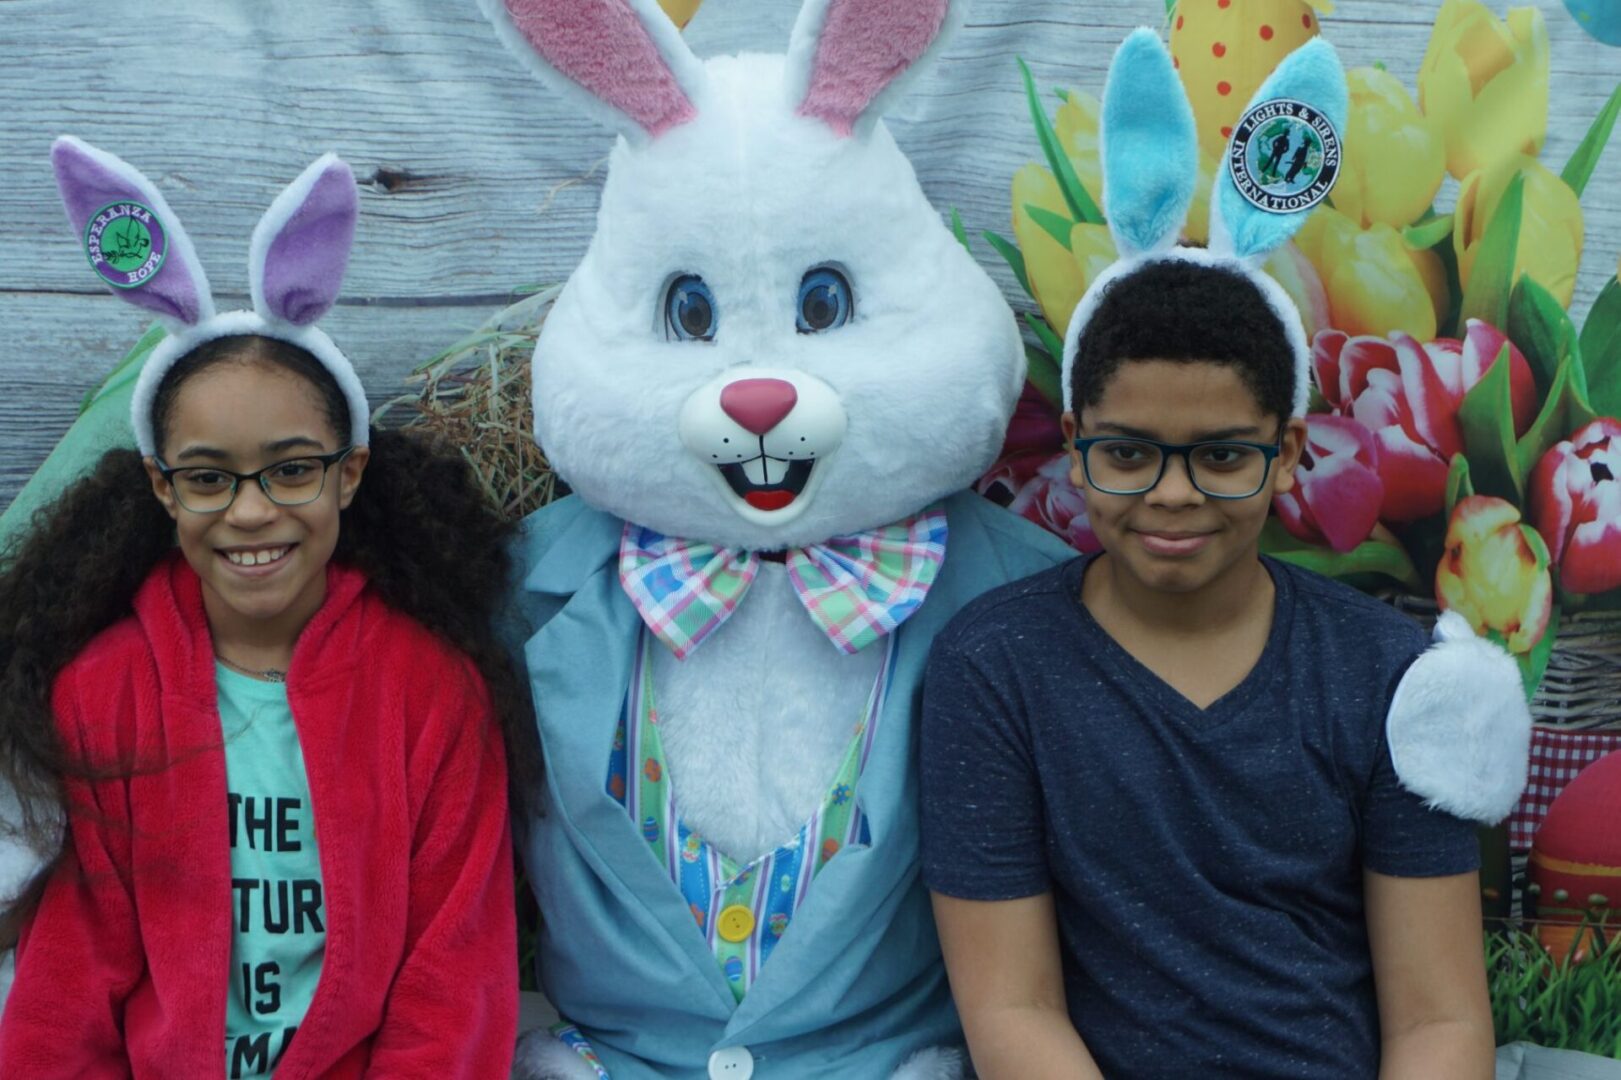 The bunny mascot together with a girl and a boy with eyeglasses and bunny ears (1)